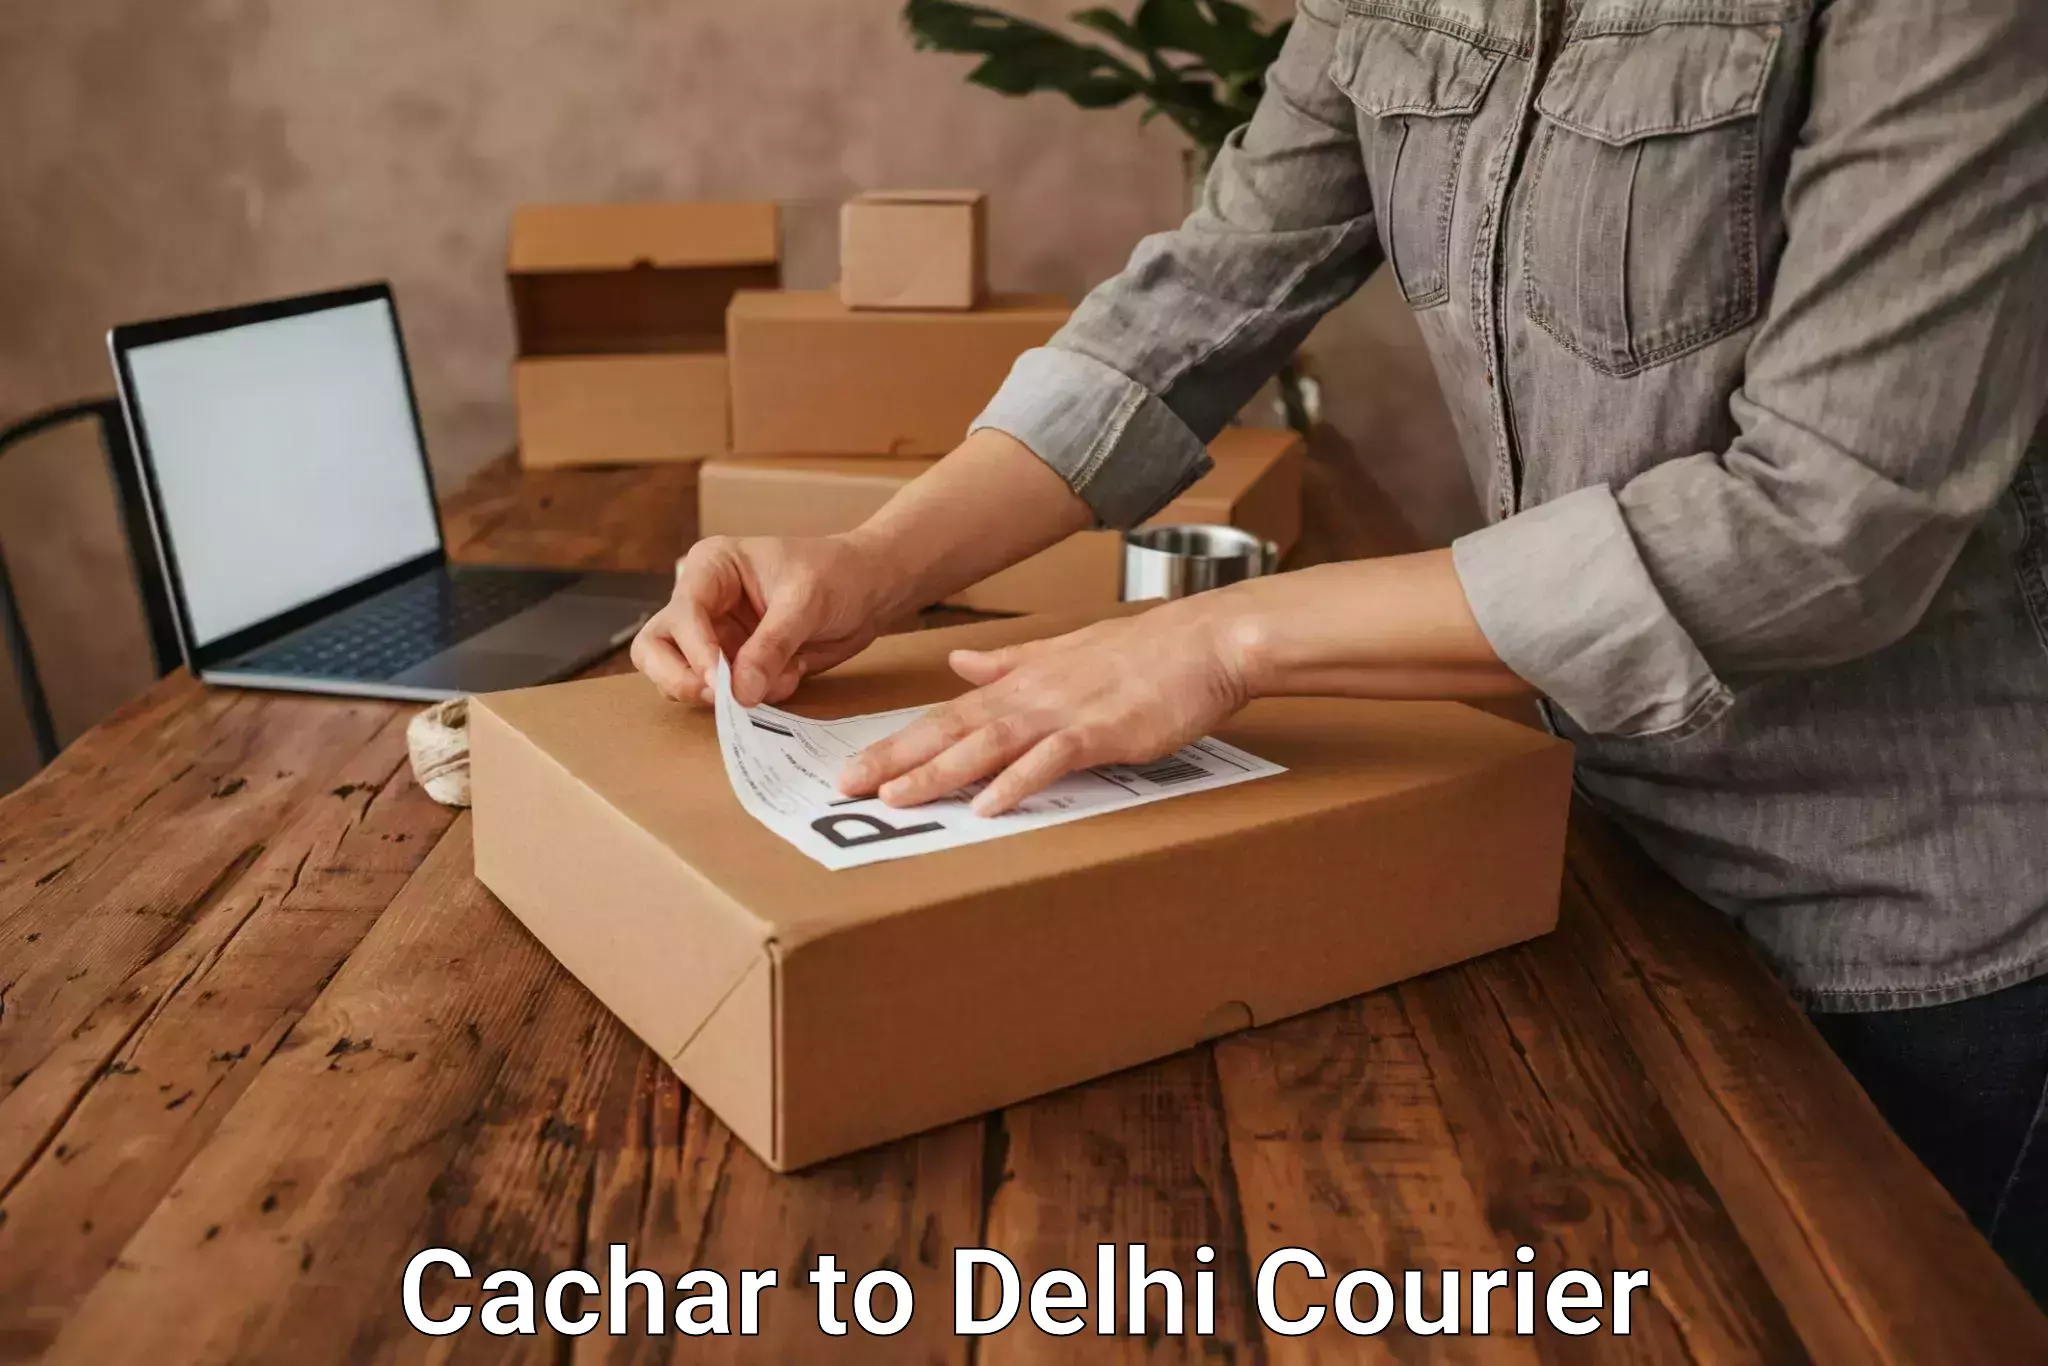 On-call courier service Cachar to Delhi